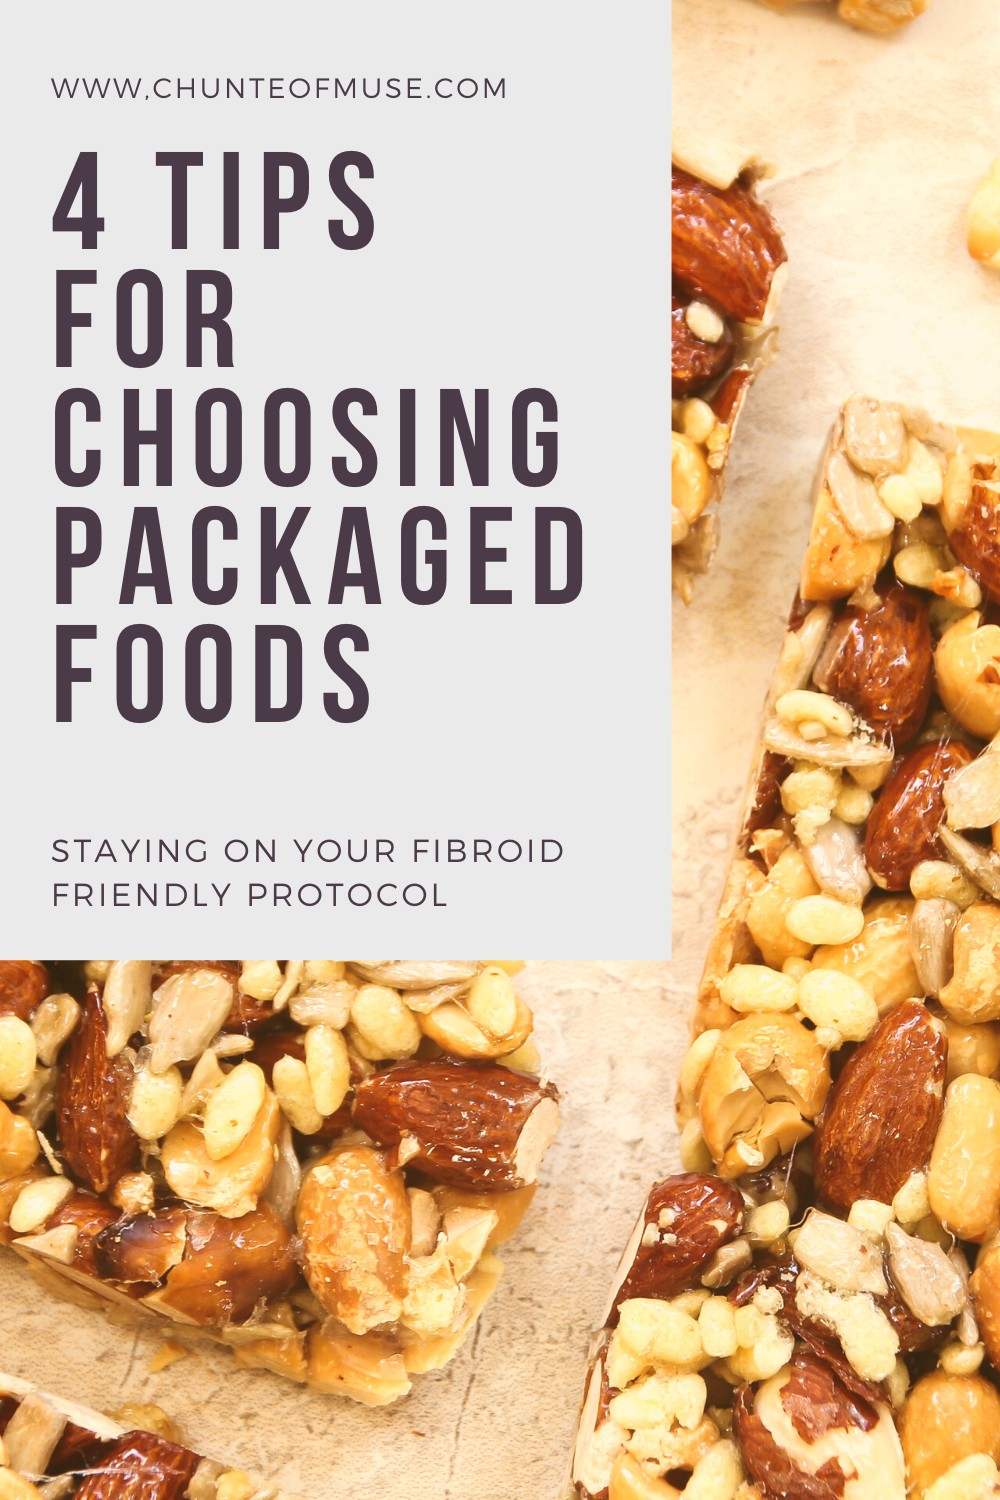 Protein bars for staying on your fibroid protocol.